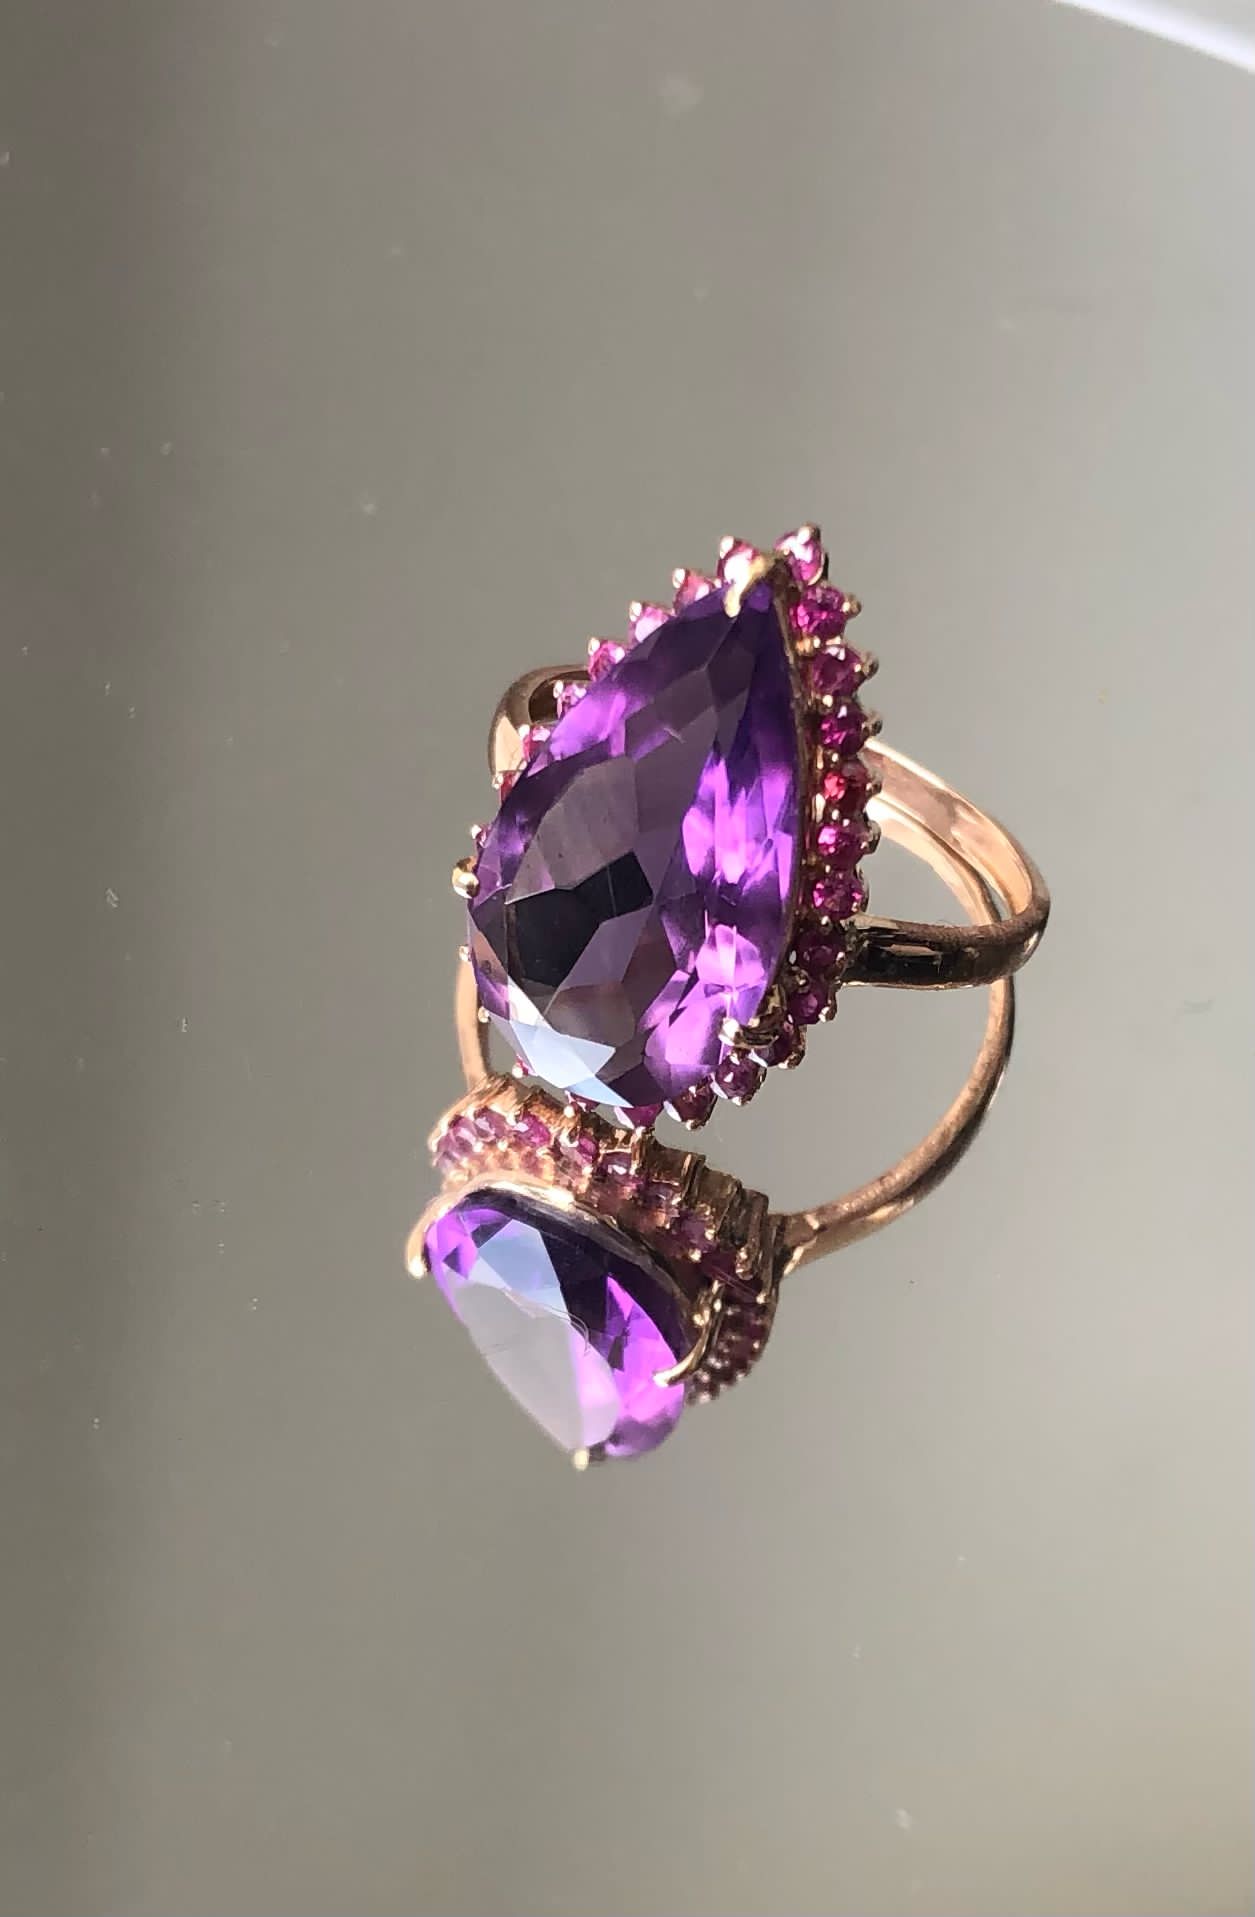 Beautiful Natural Amethyst 4.55Ct With Natural Burma Ruby & 18k White Gold - Image 6 of 9